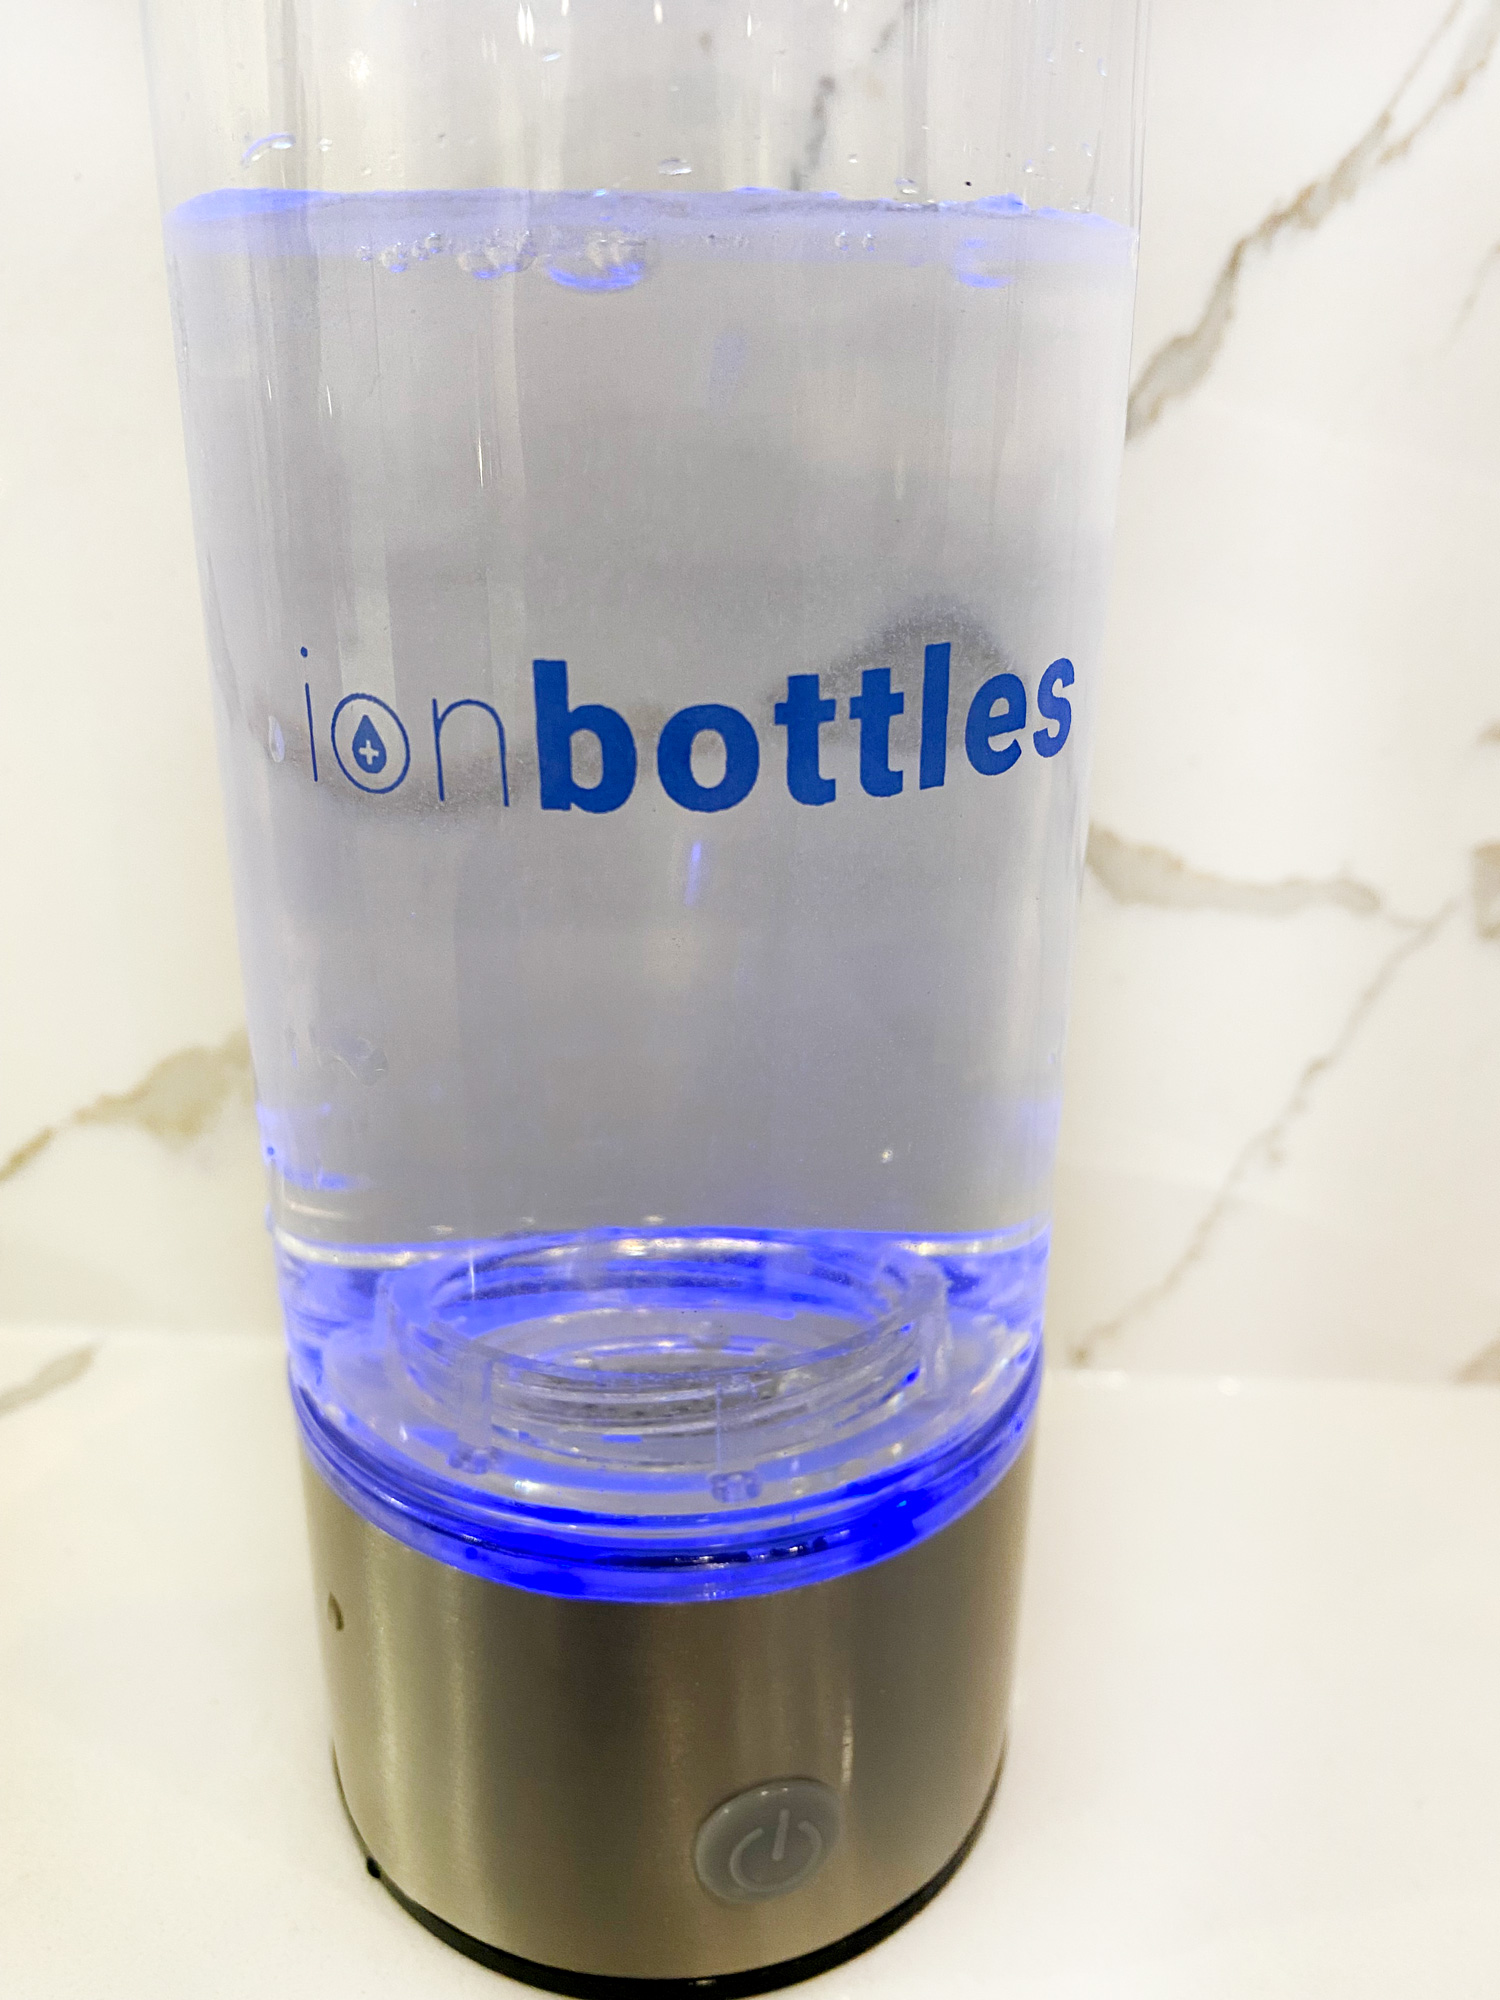 ionbottles review